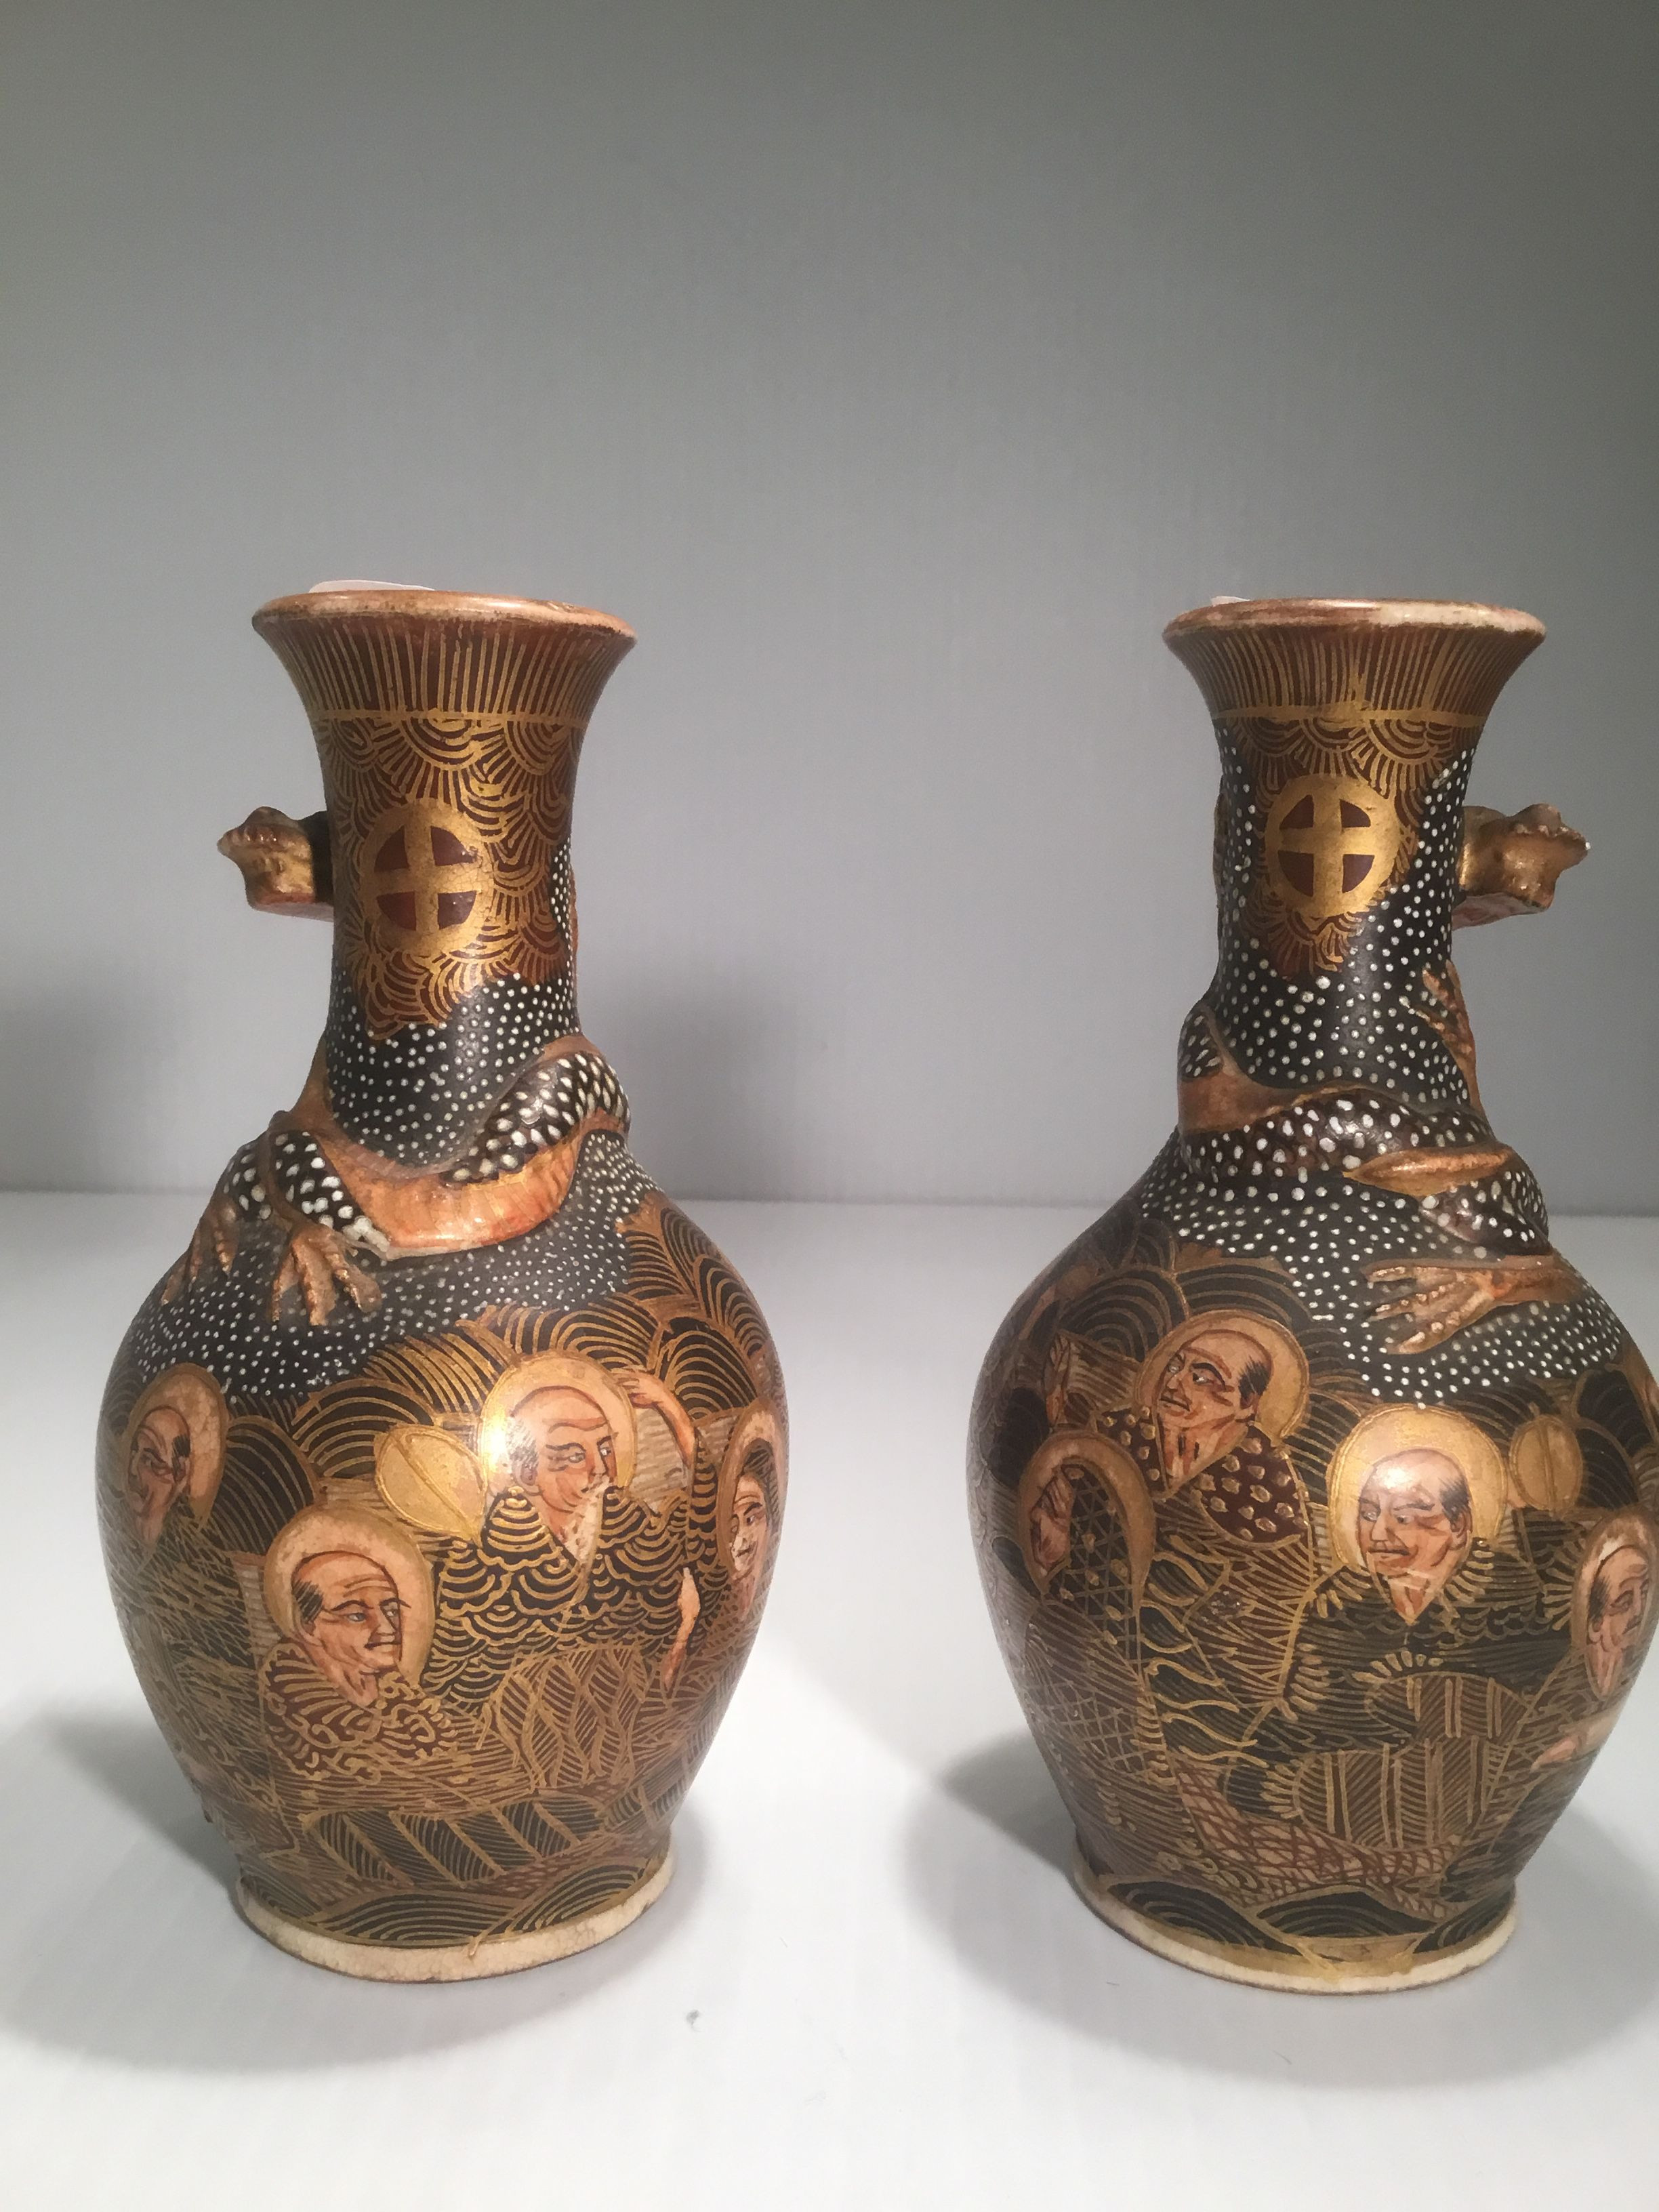 21 Cute Antique Vases for Sale 2024 free download antique vases for sale of hododa satsuma vases pinterest ware f c with hododa